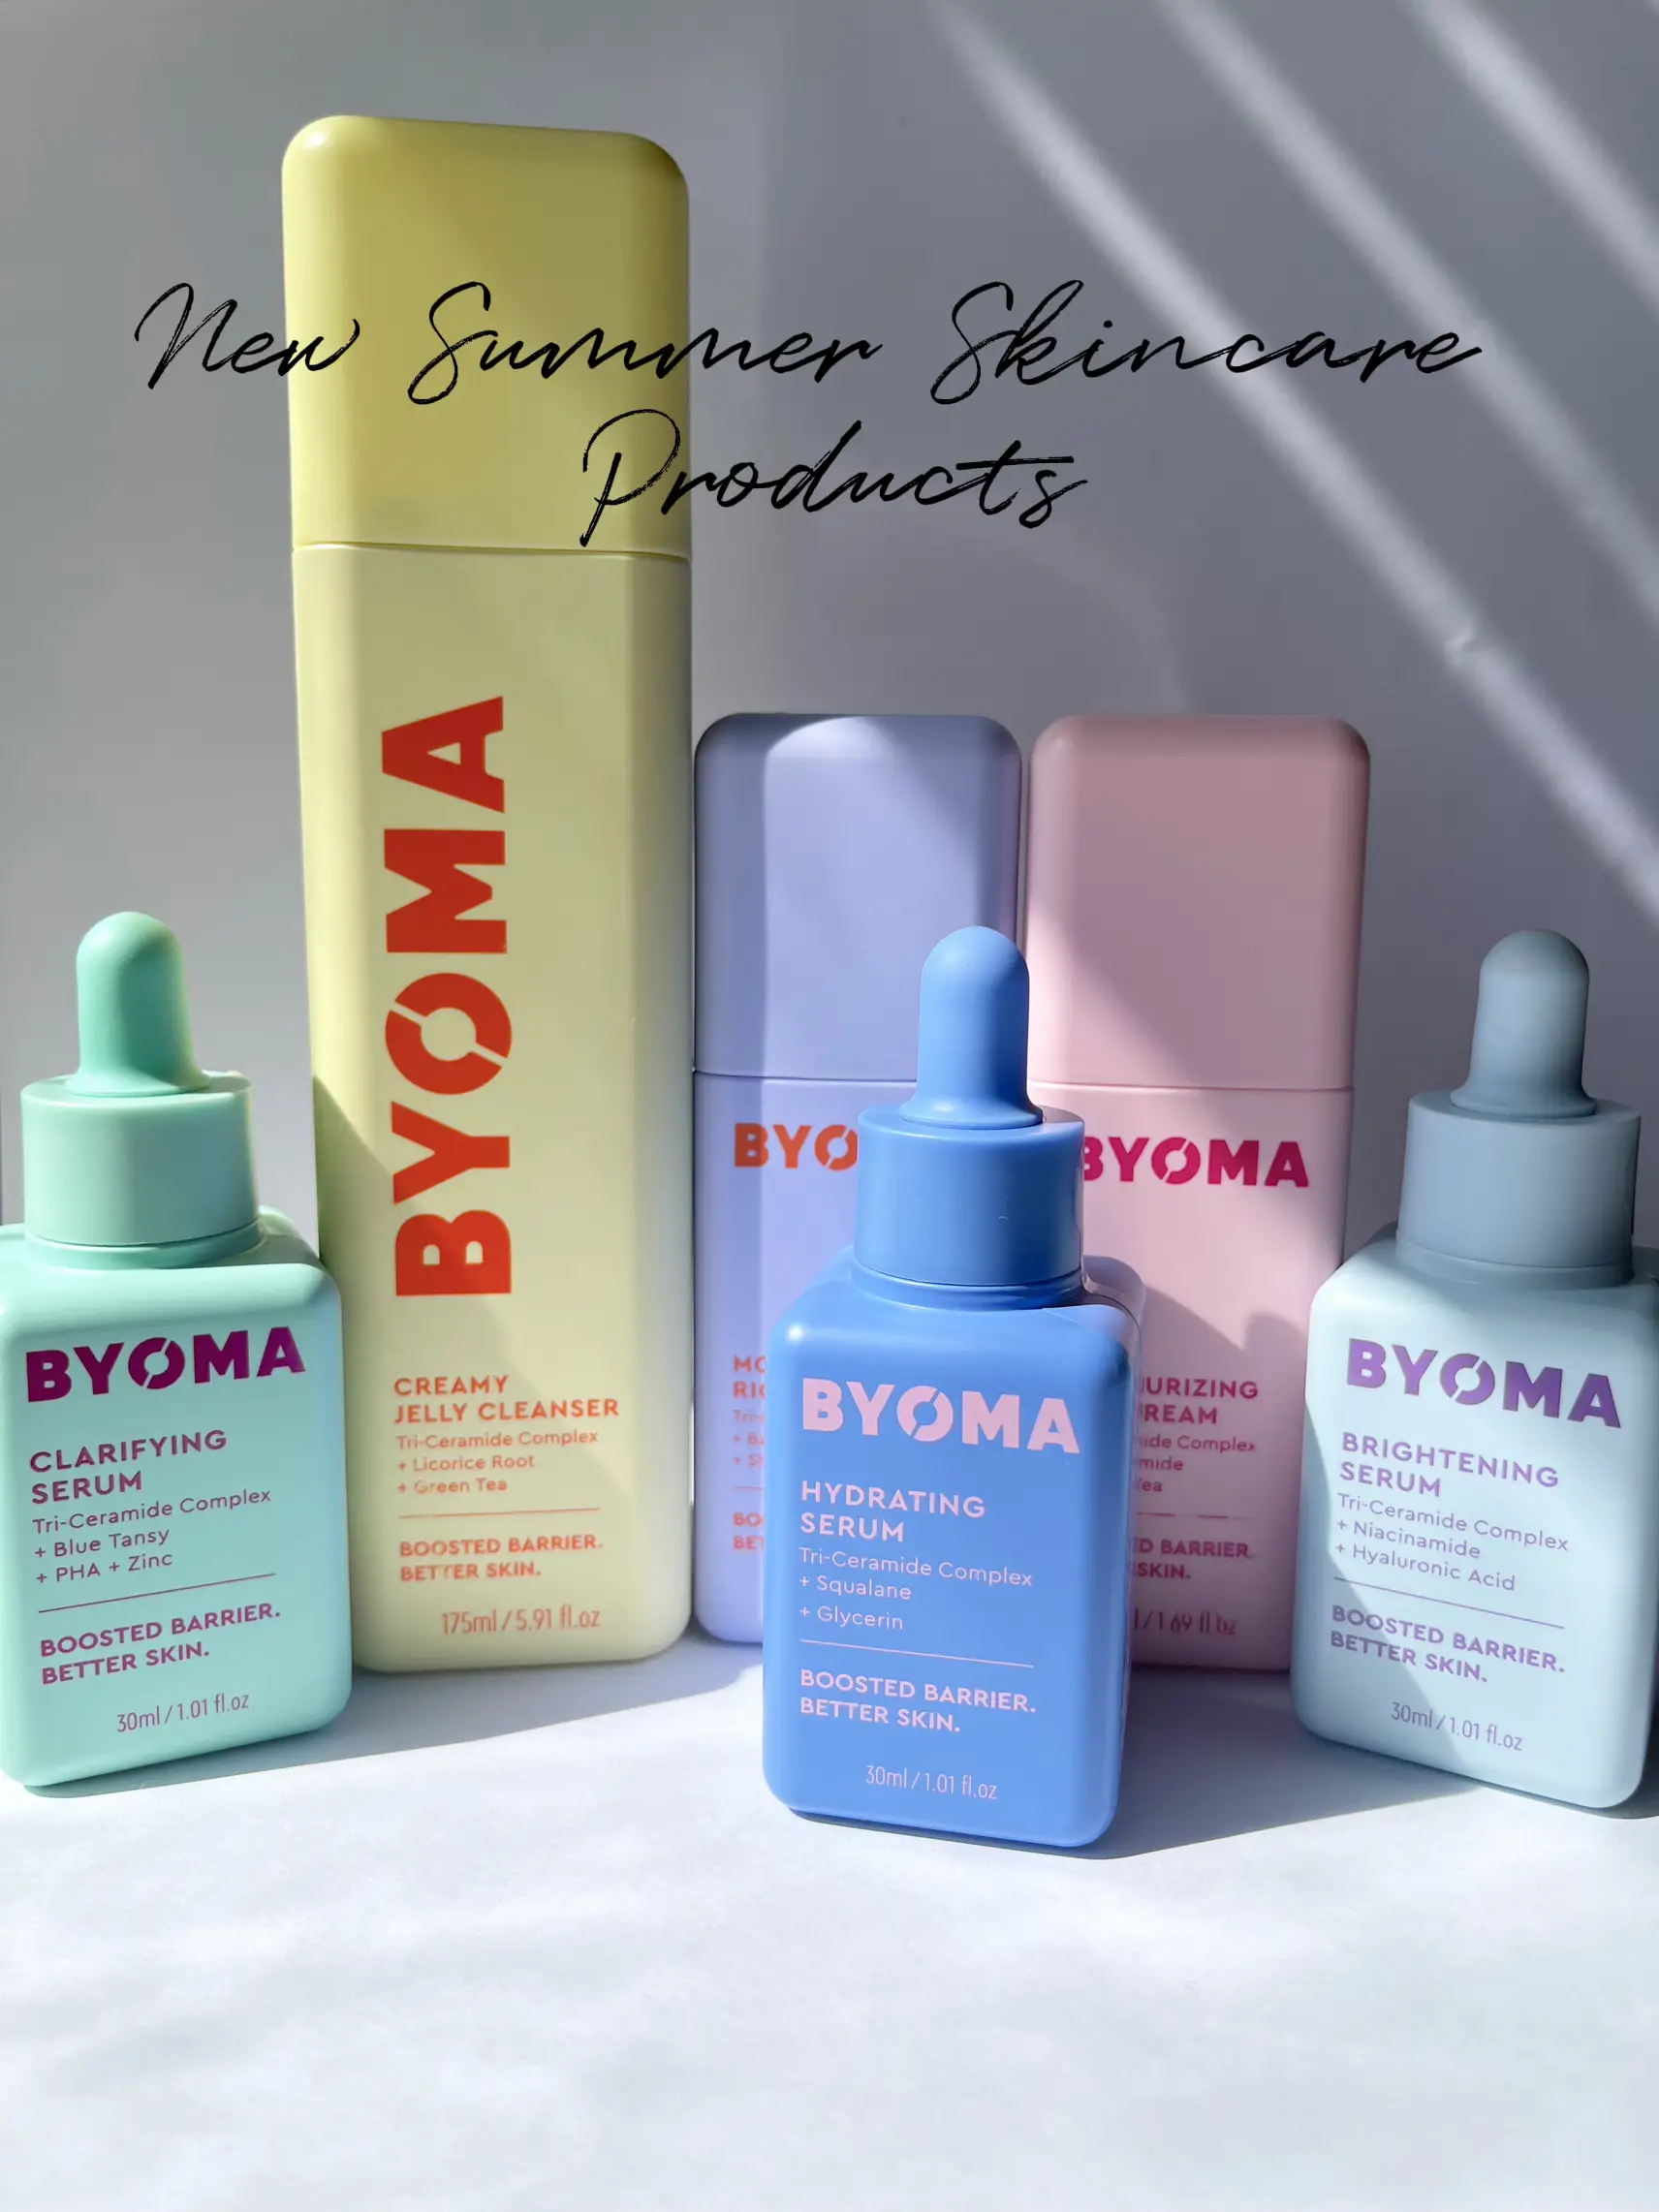 byoma #skincare  Face cleanser, Skin care, Hydrating serum